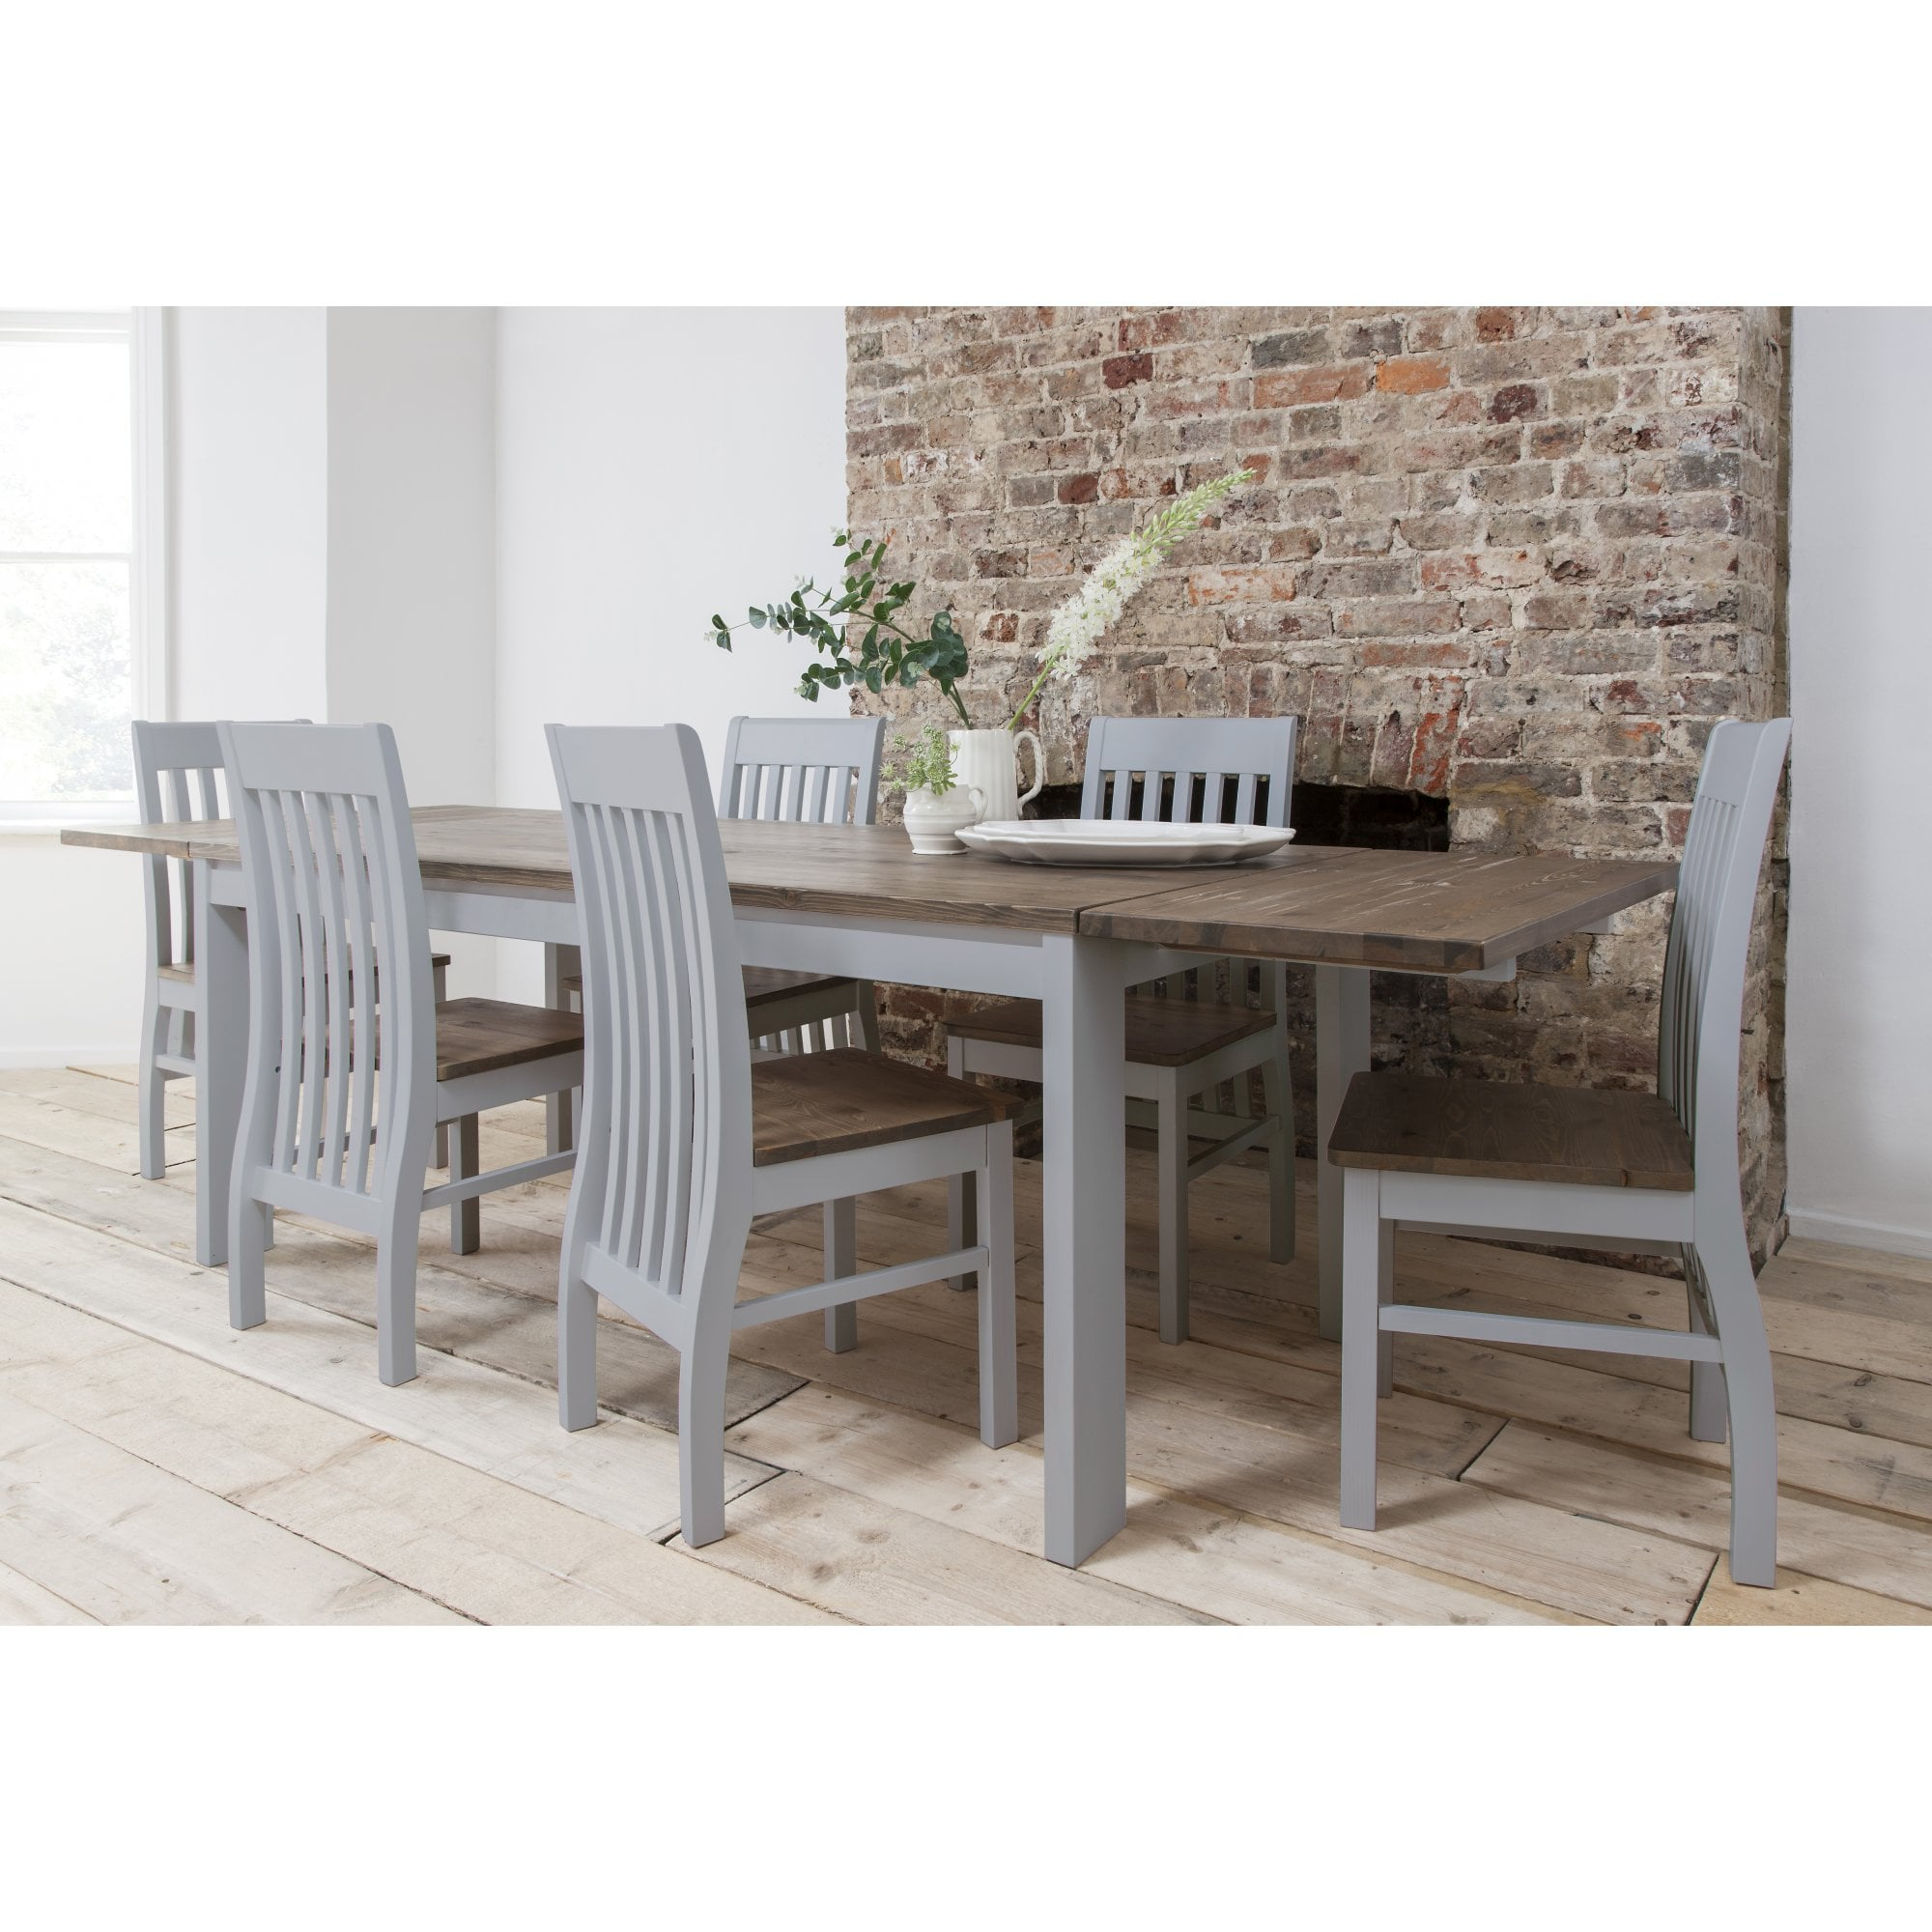 Hever Dining Table With 6 Chairs 2 Extensions In Grey And Dark Pine with regard to proportions 2000 X 2000